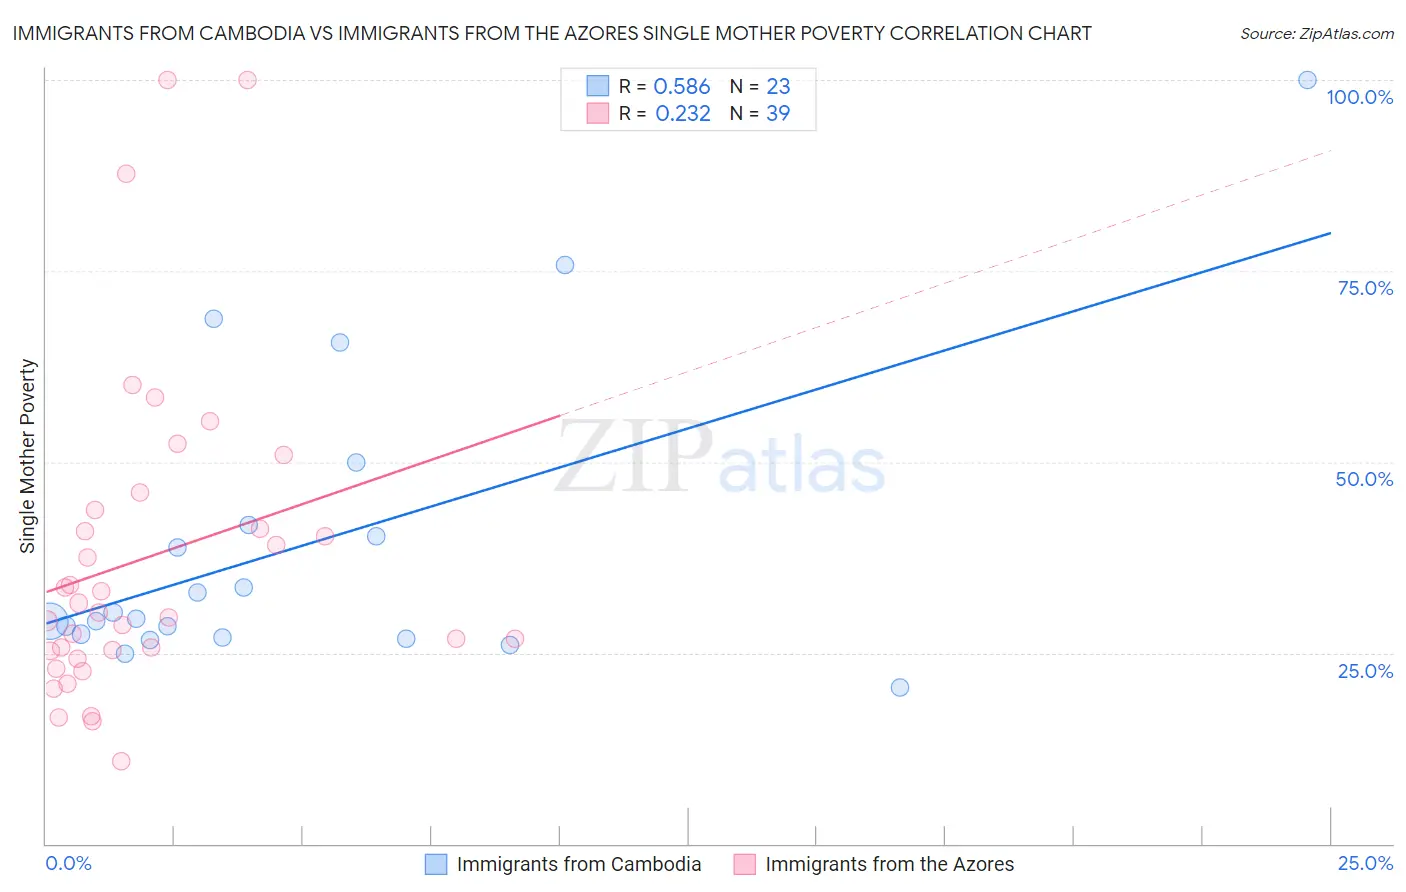 Immigrants from Cambodia vs Immigrants from the Azores Single Mother Poverty